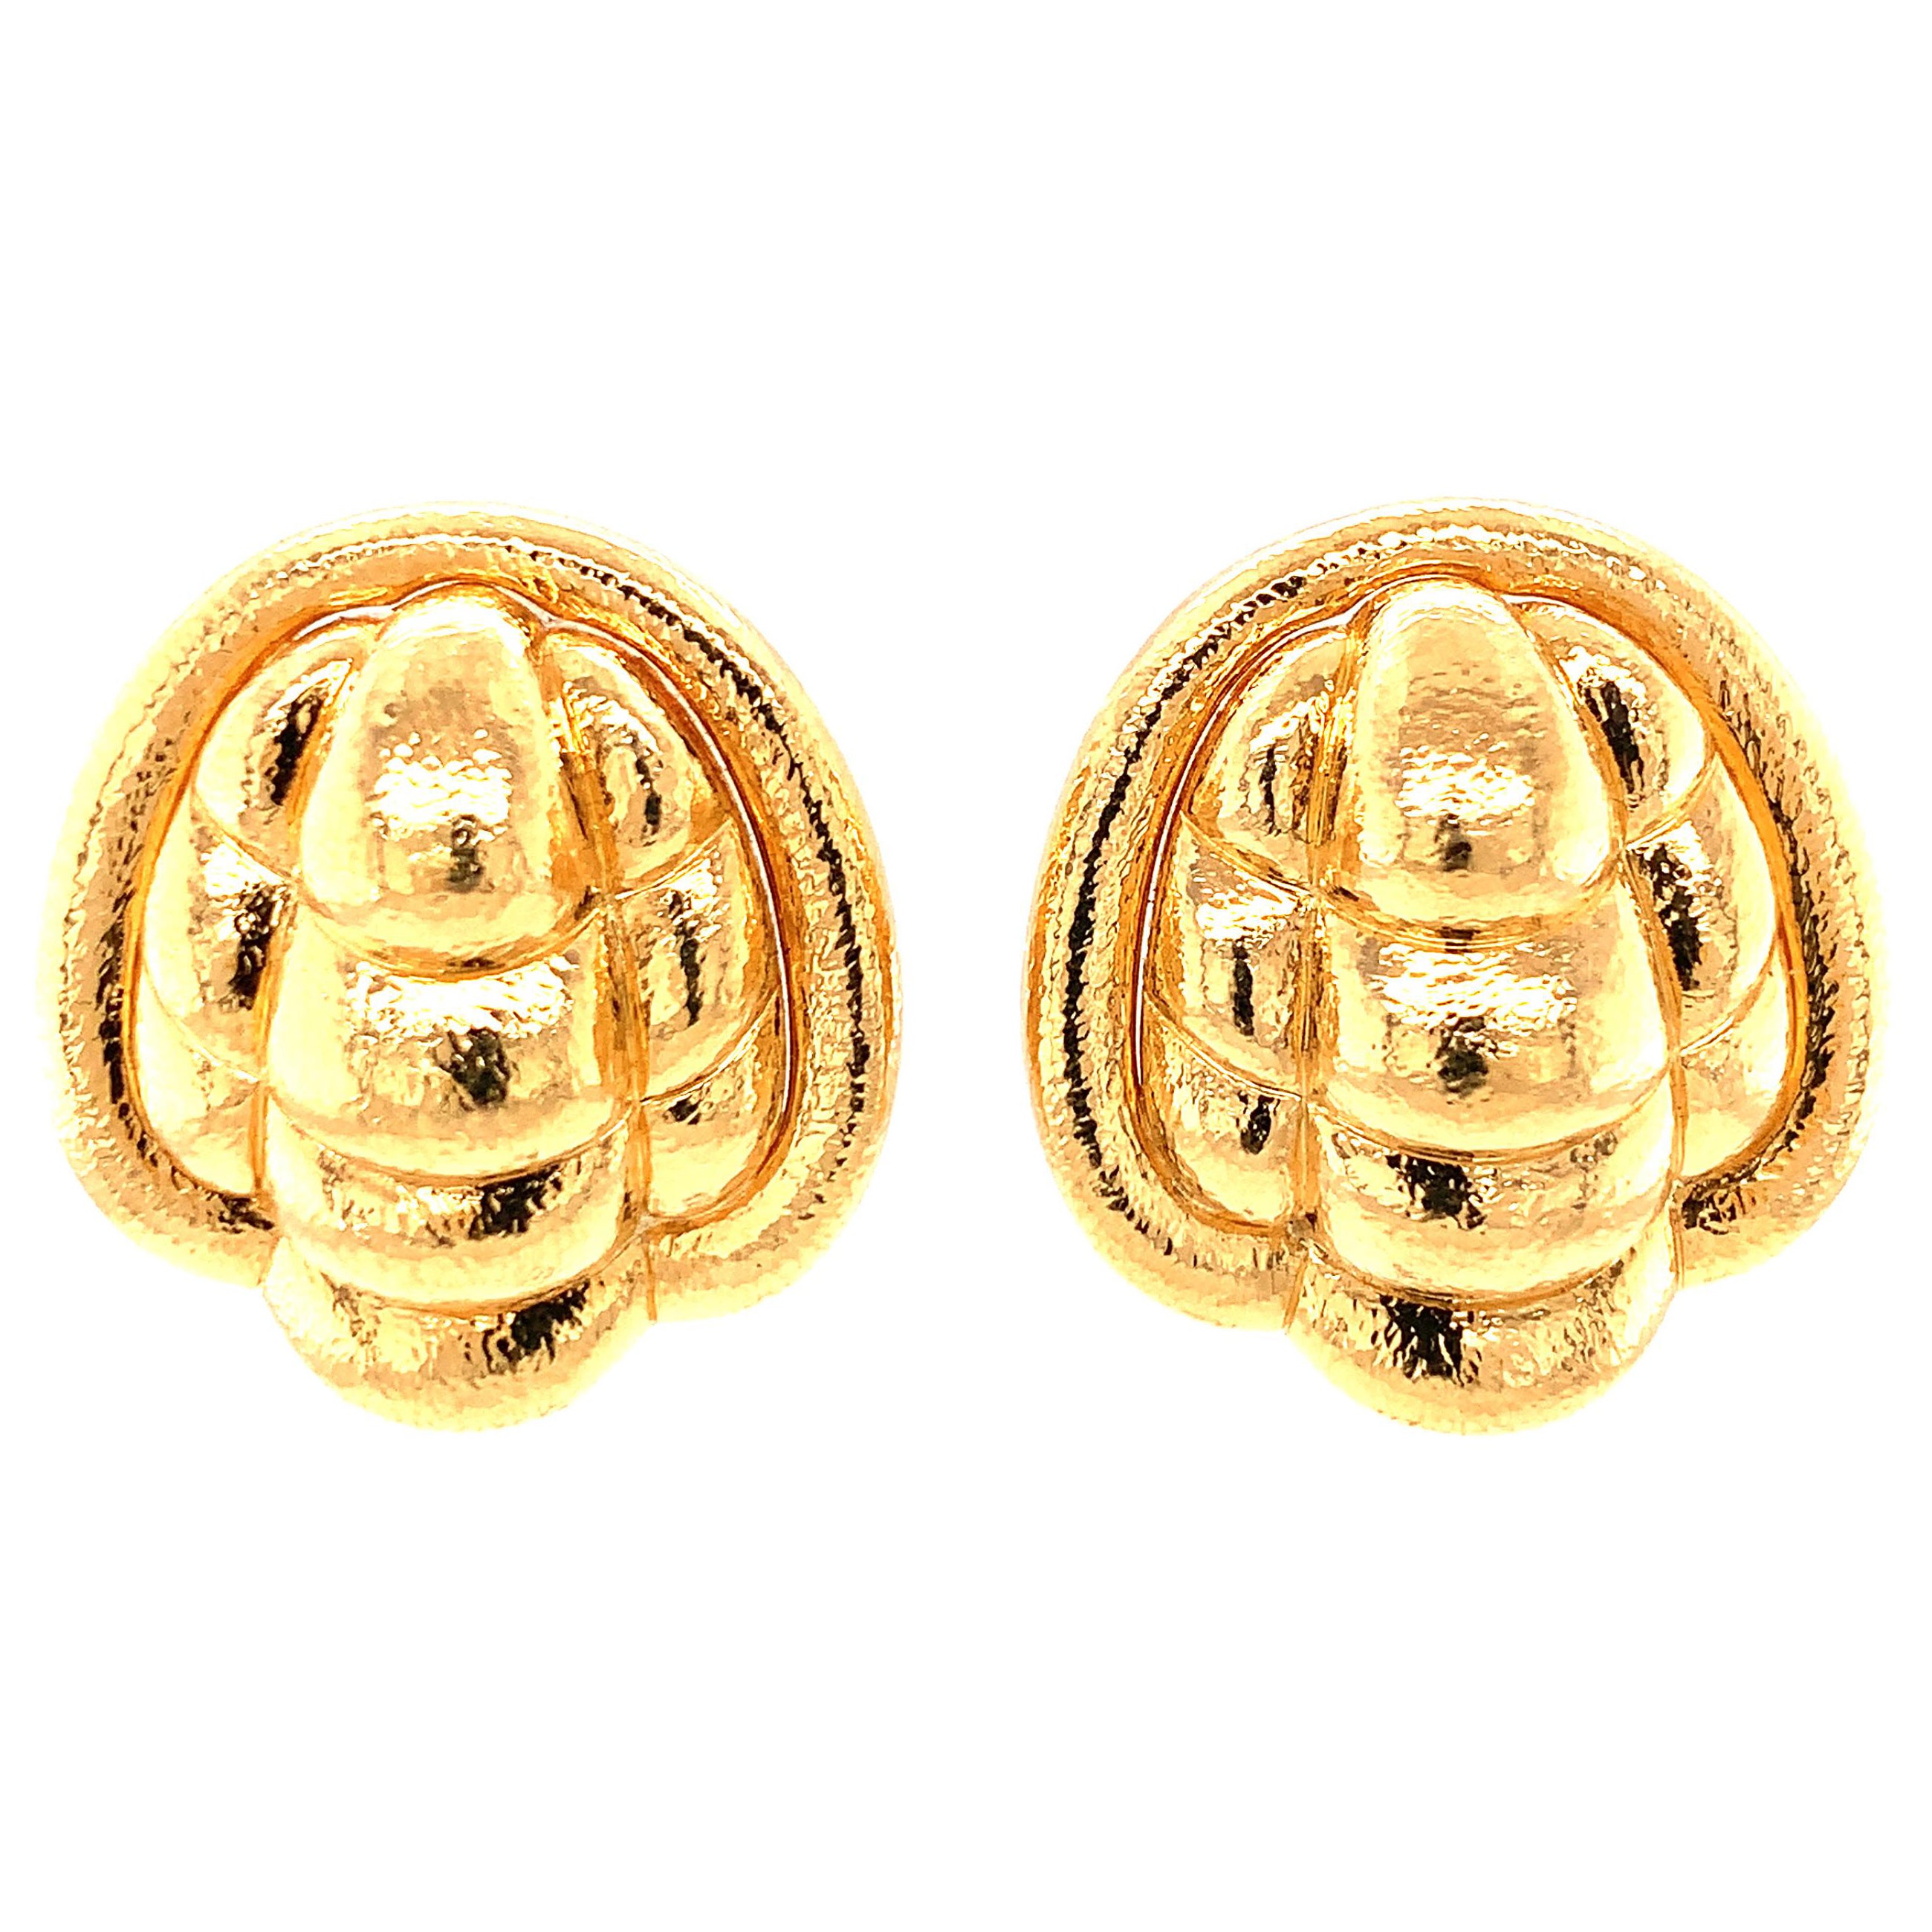 Hammered 18k Yellow Gold Earrings, circa 1960s For Sale